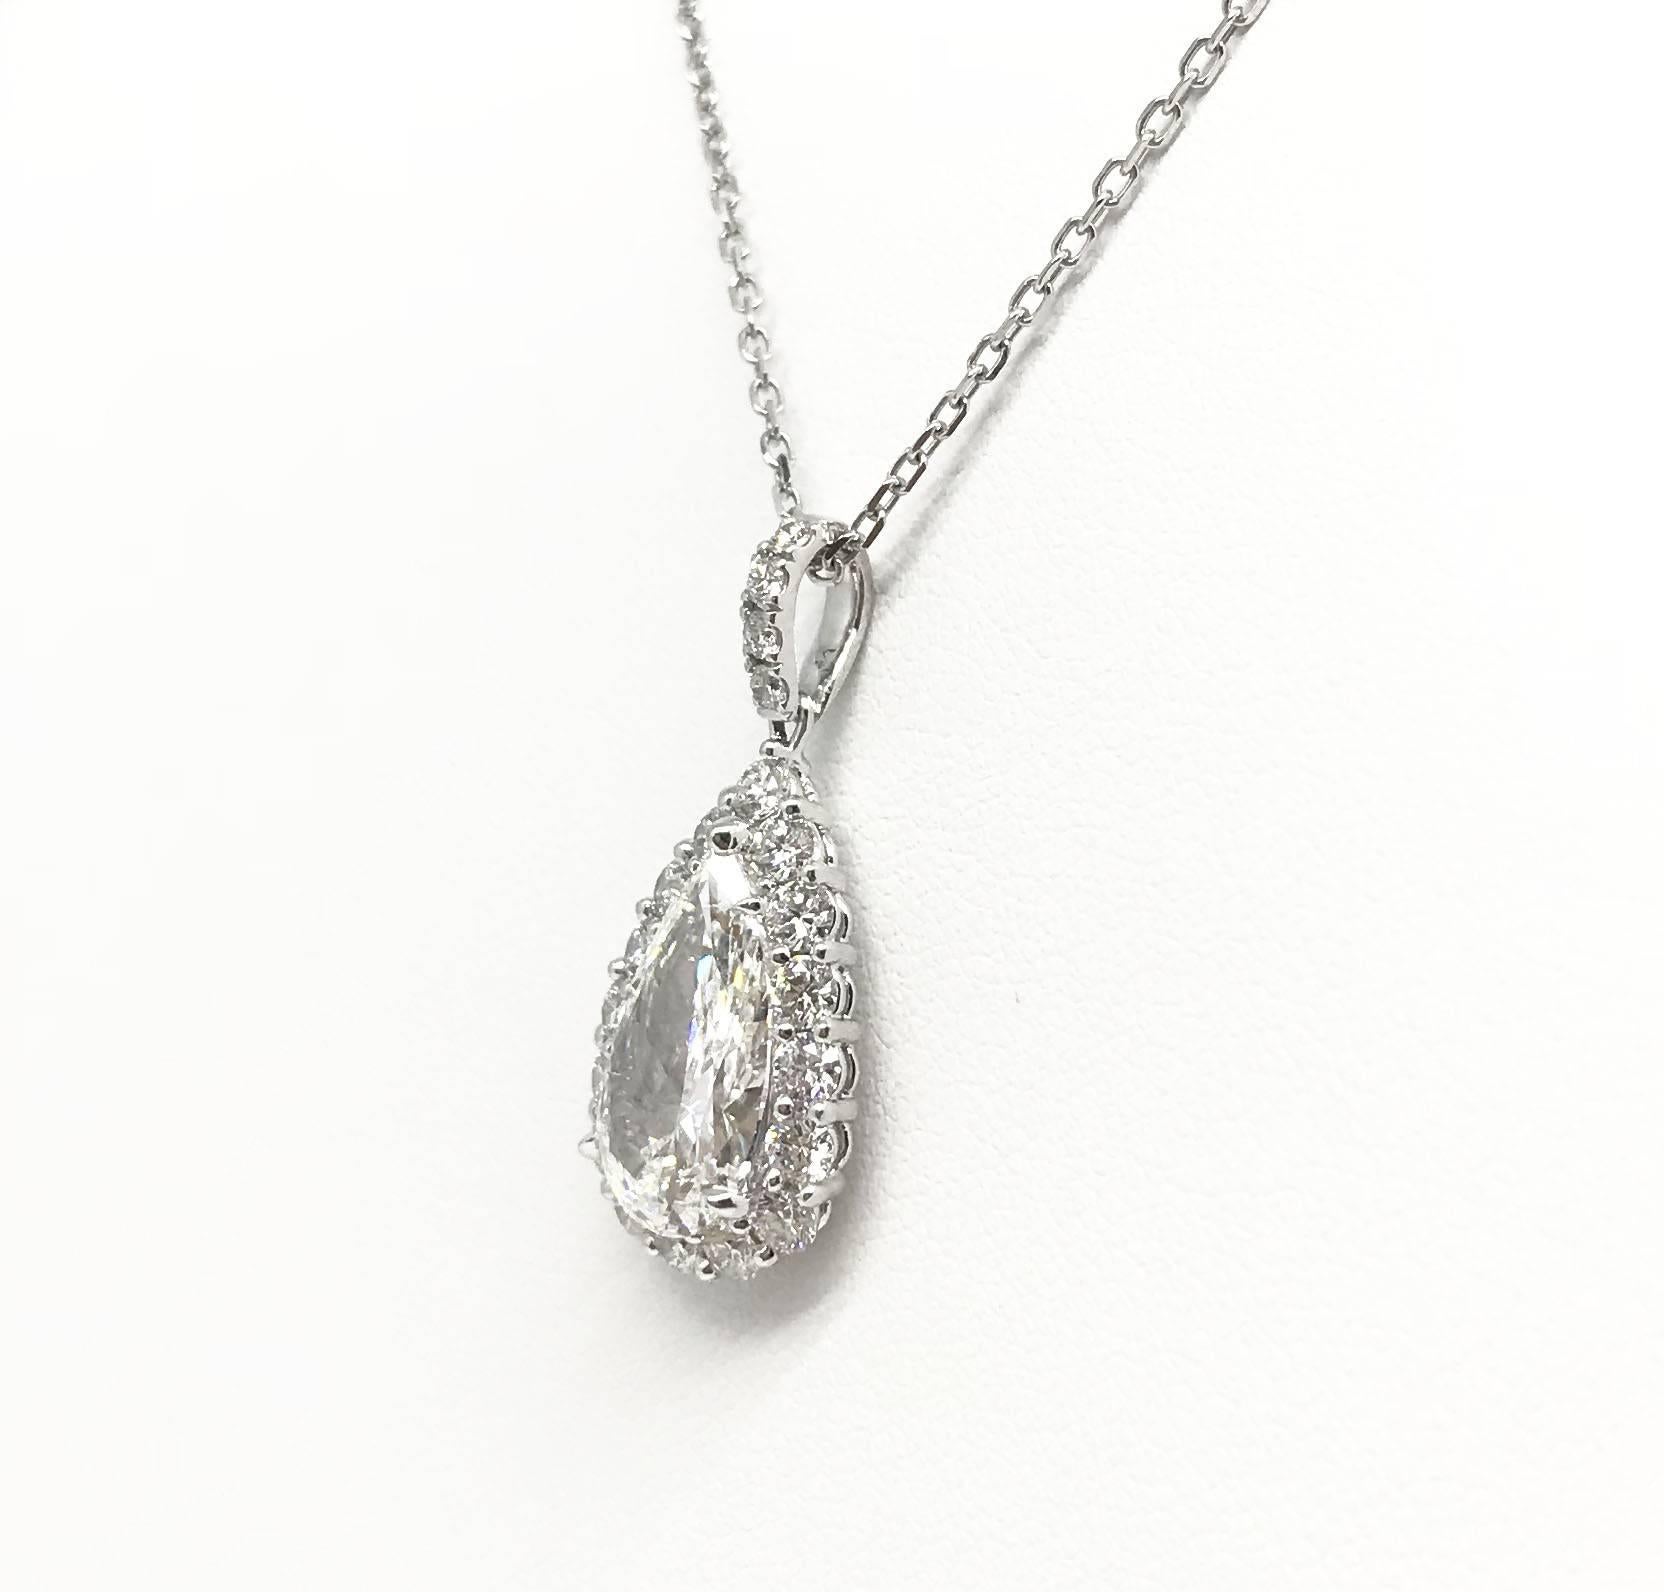 An exquisite H Colour 3.17 carat VS1 pear shaped diamond, surrounded by 1.07 carat pave setting diamonds is an irresistible choice for her. The piece is set in Platinum. Chain not included.

